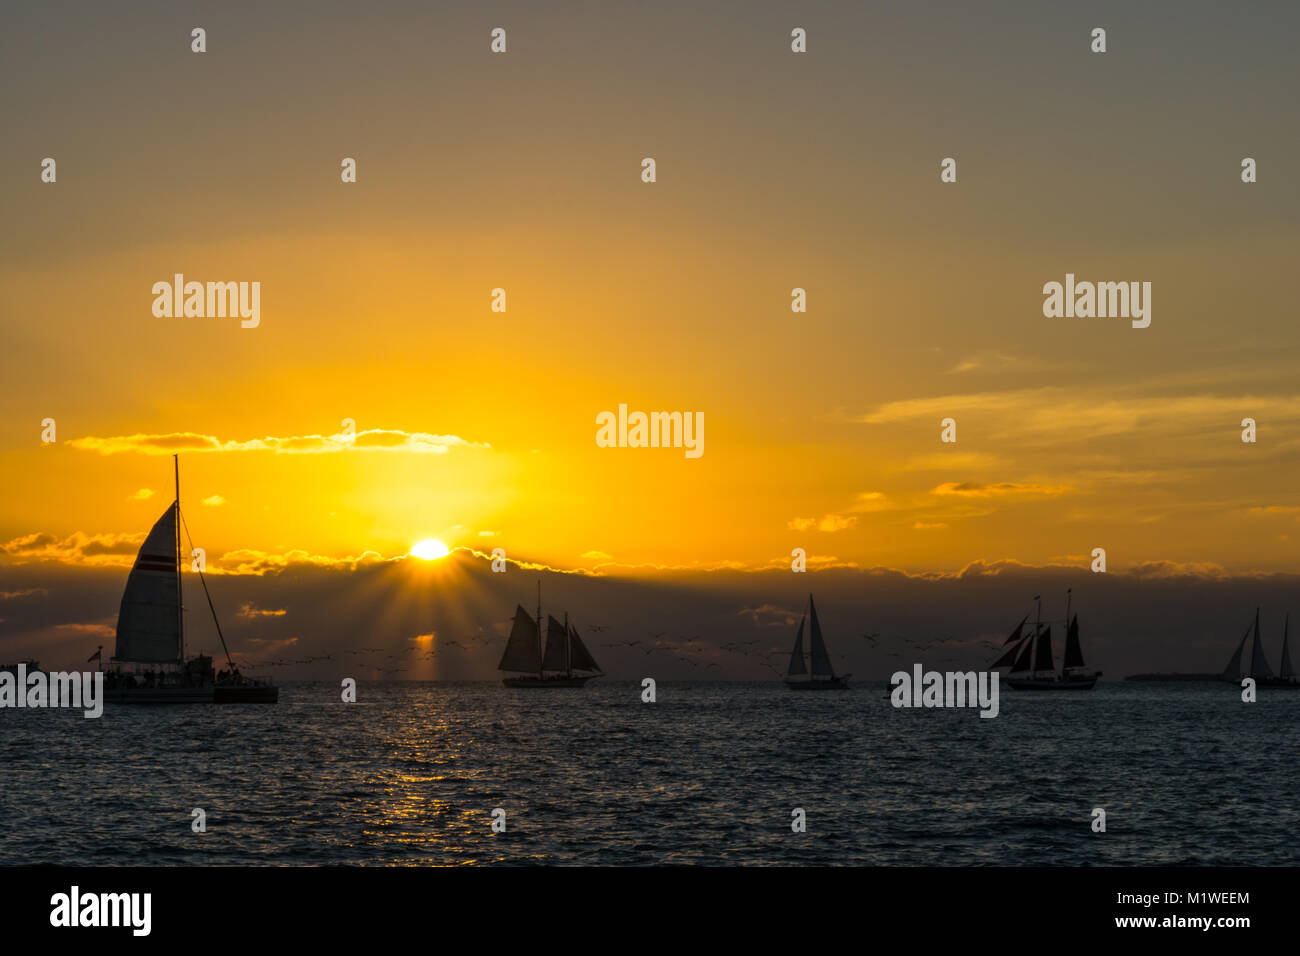 USA, Florida, Spectacular sunset at key west with many sailboats on the water and orange sky Stock Photo